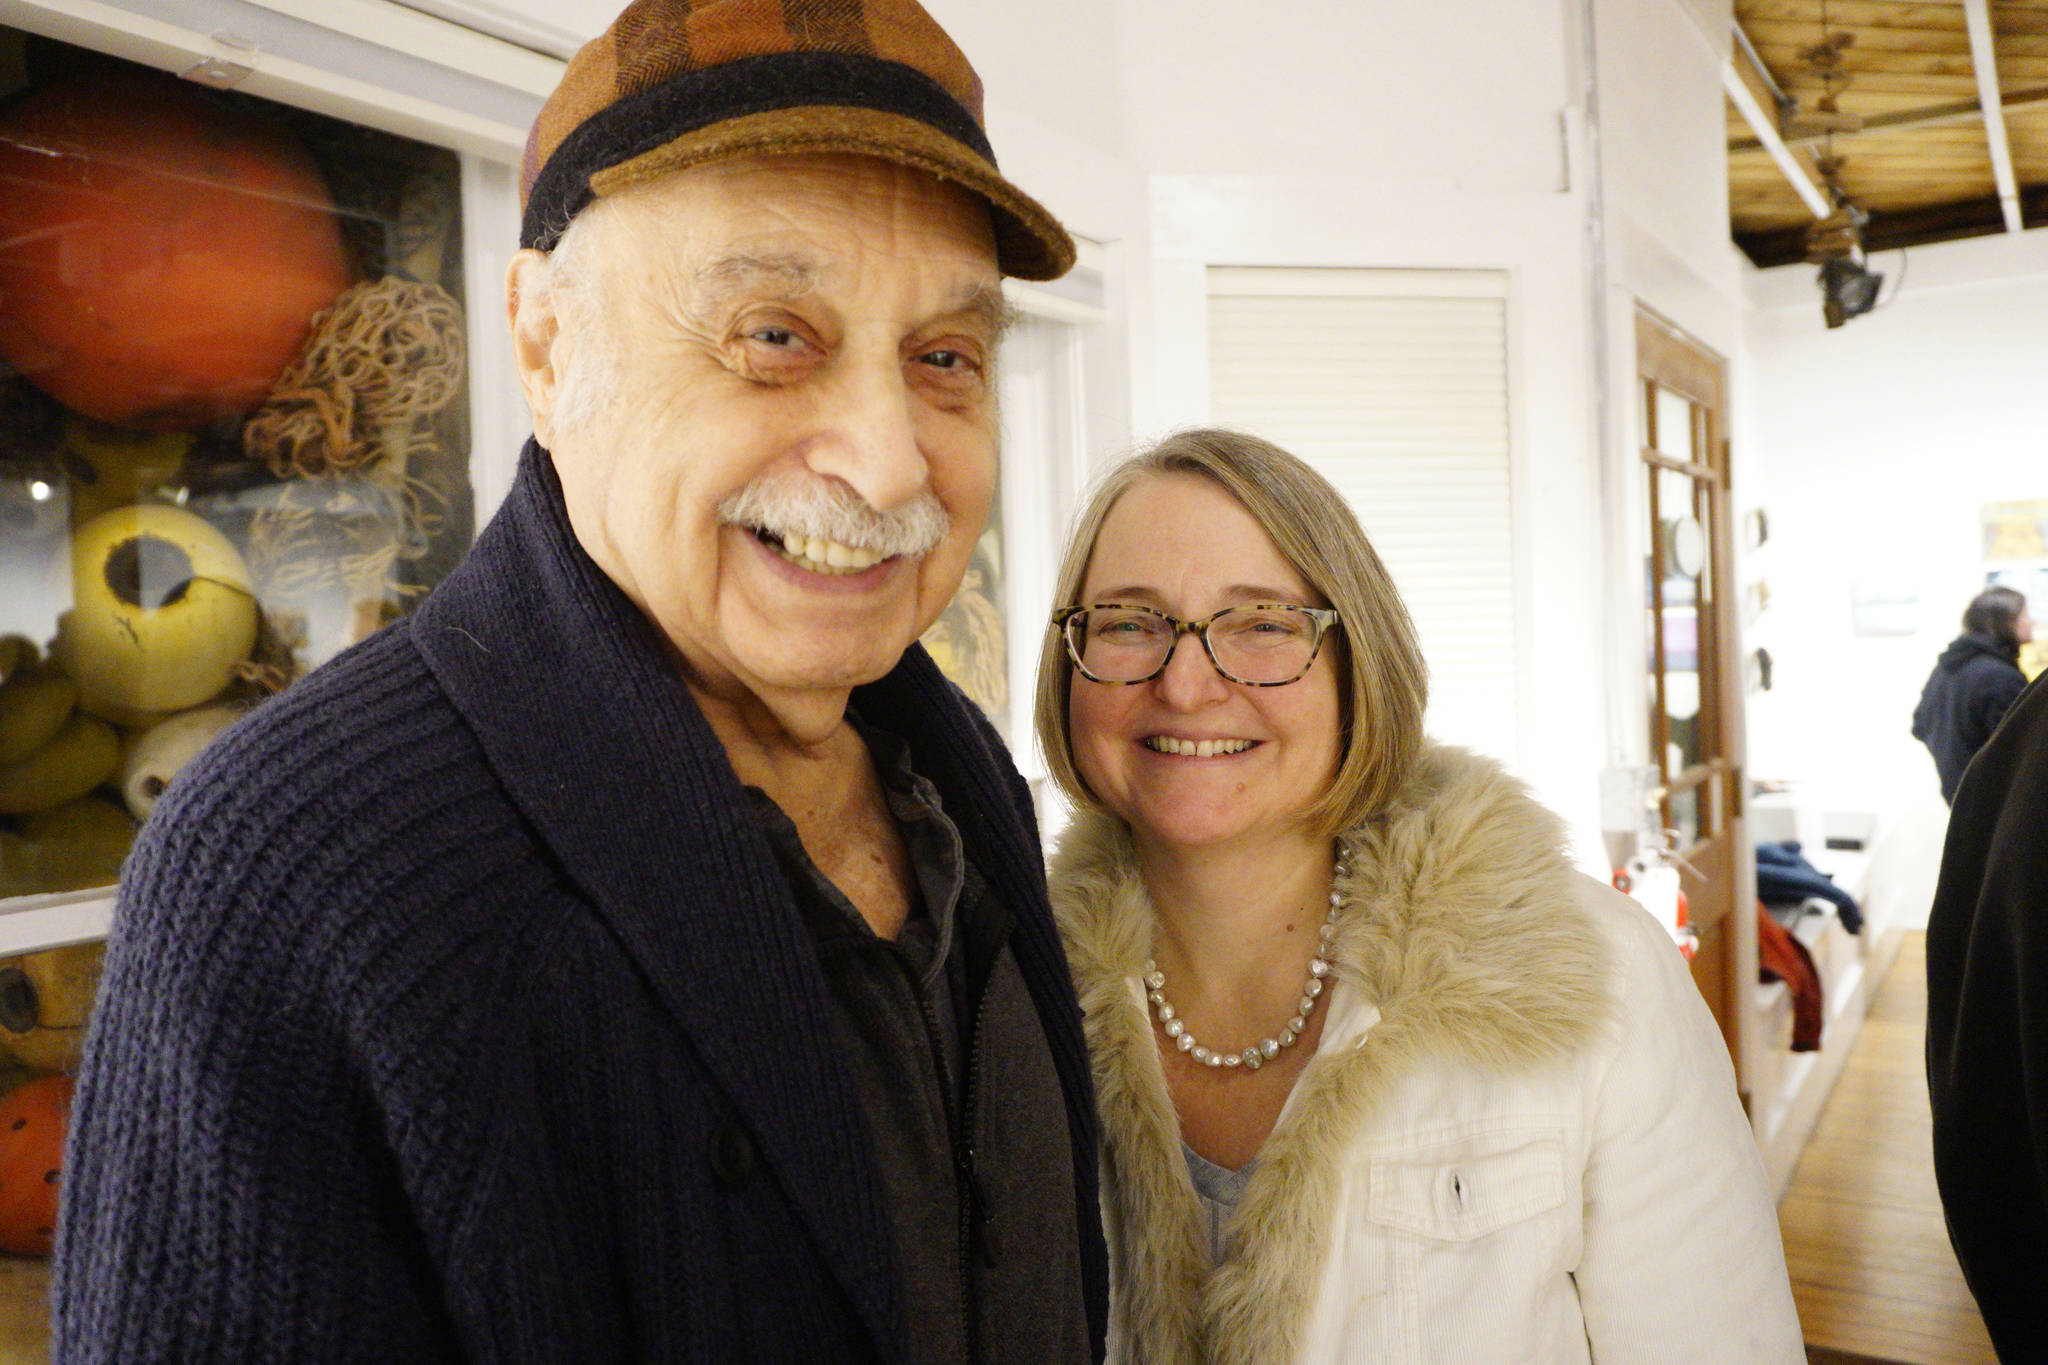 Jack Packer, left, and his daughter, Sharlene Cline, pose for a photo at the First Friday, Dec 7, 2018, opening of Bunnell Street Arts Center’s 10x10 show in Homer, Alaska. Both had paintings in the show. (Photo by Michael Armstrong/Homer News)